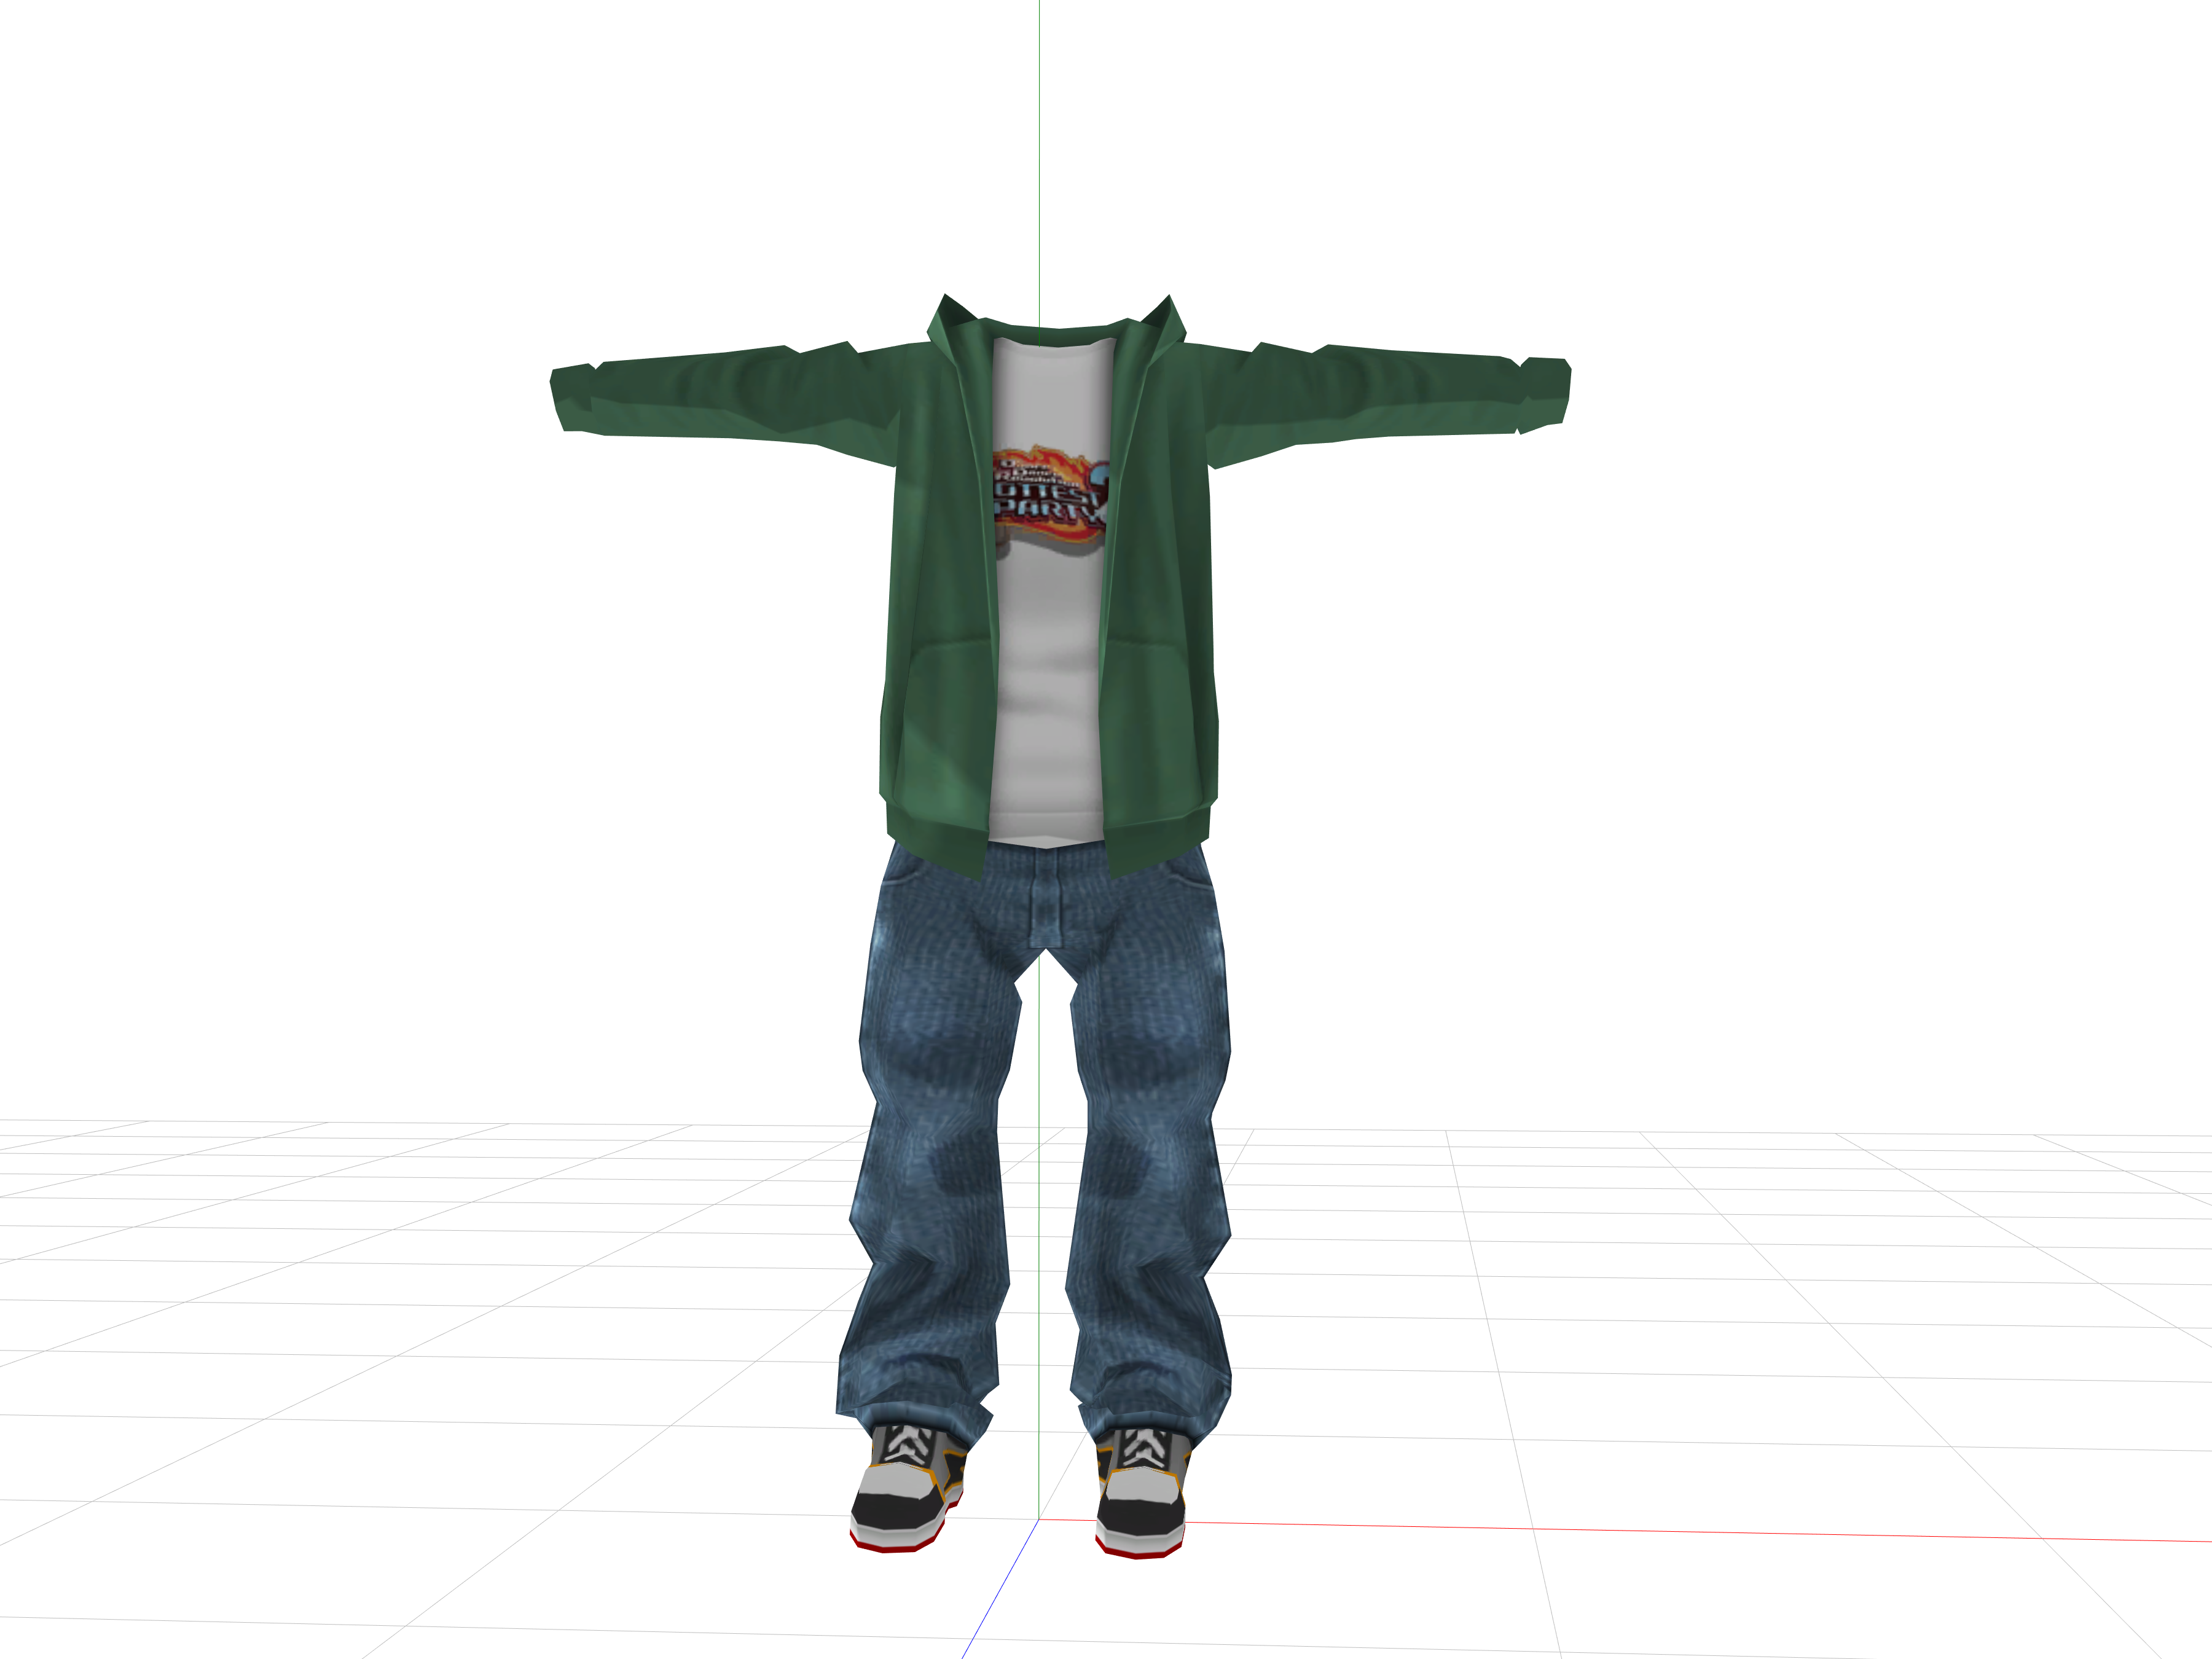 MMD - DDR Hottest Party Mii Male Cloths download by artinkers on DeviantArt